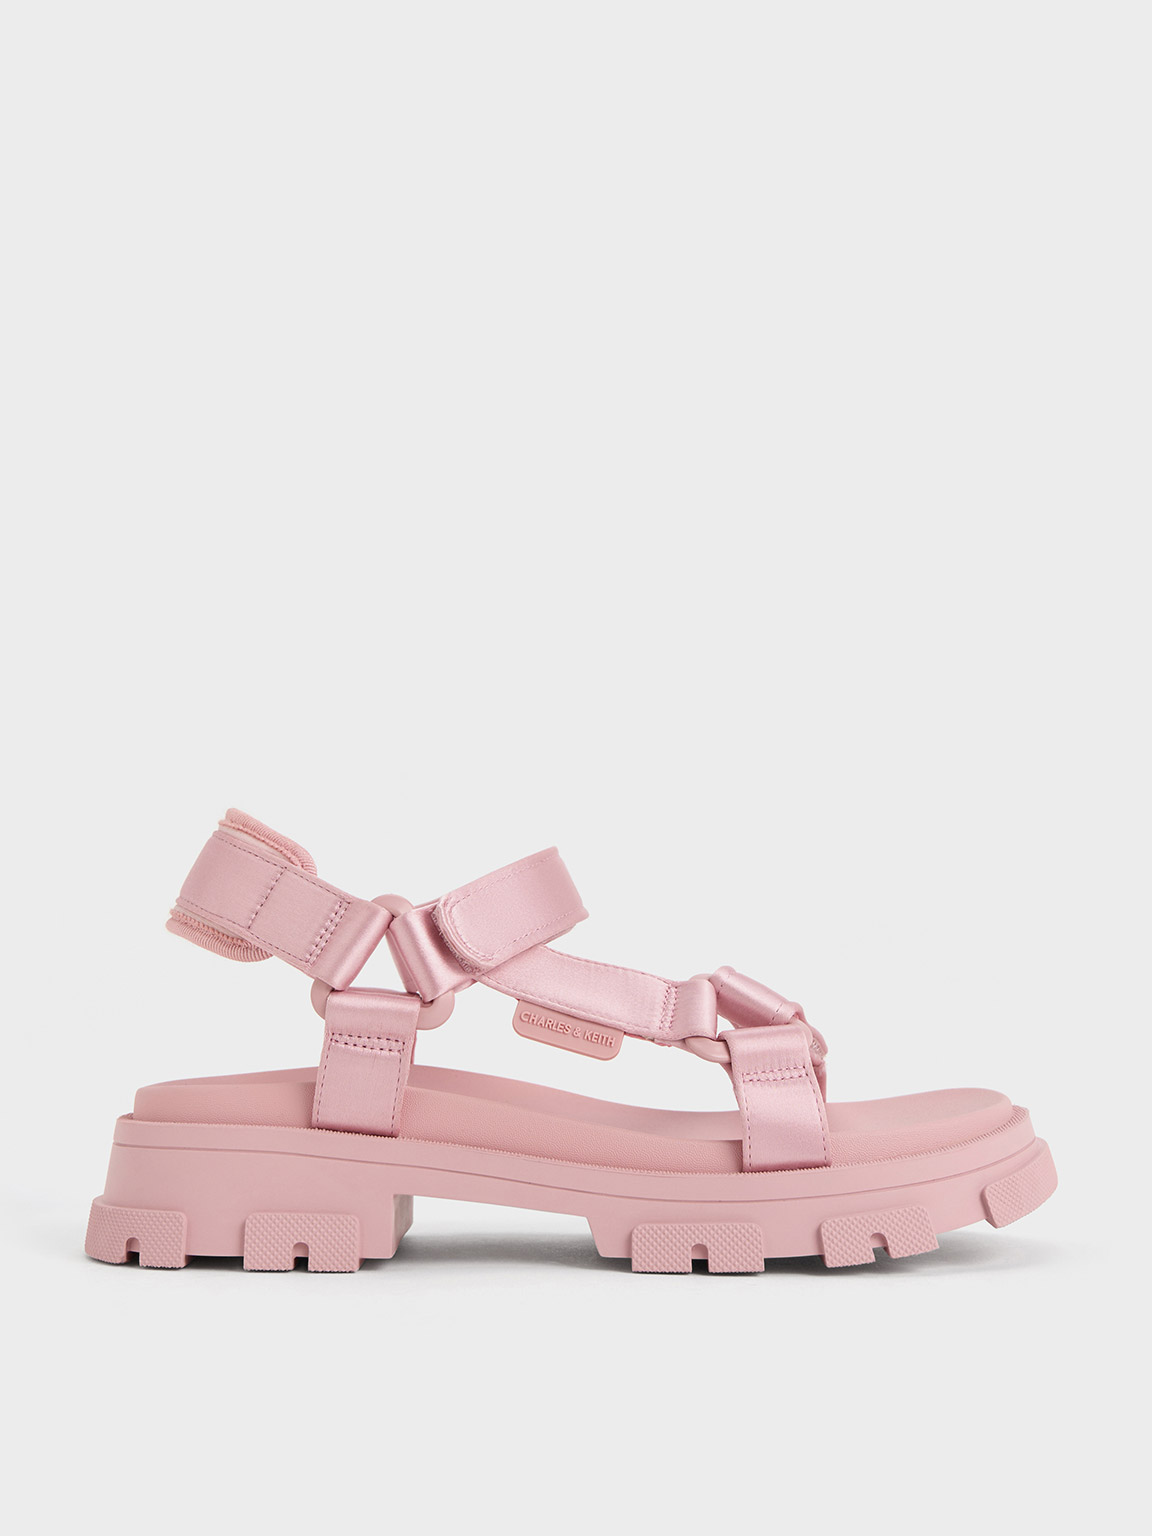 Charles & Keith - Girls' Satin Sports Sandals In Pink